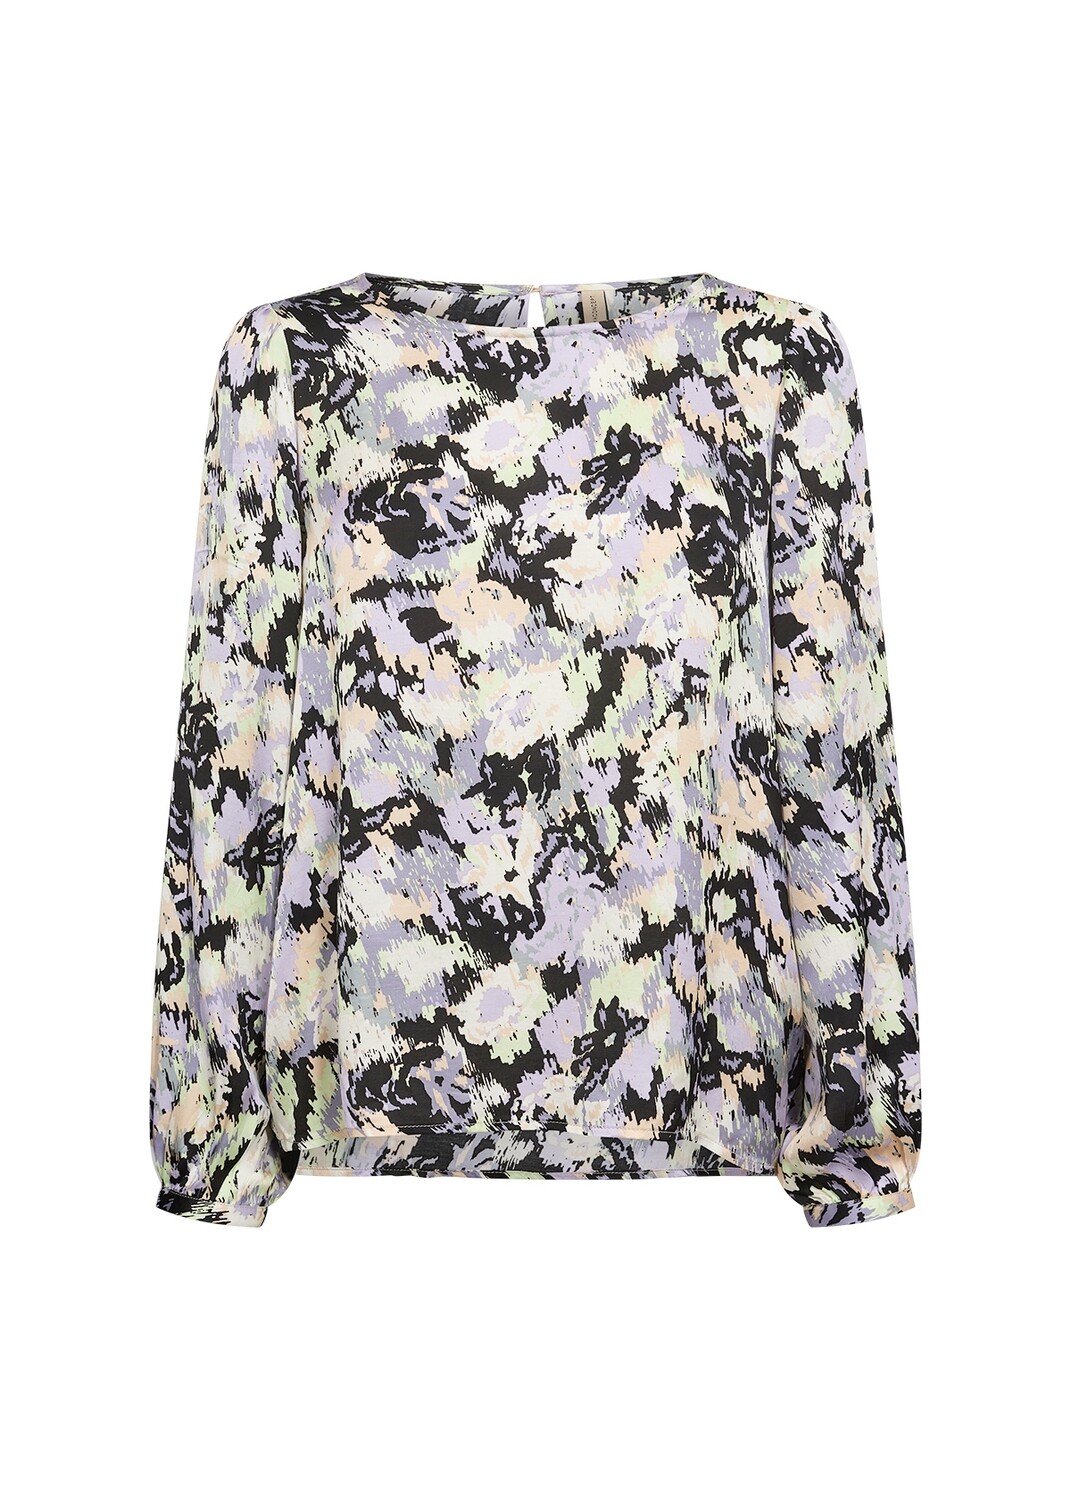 SOYACONCEPT ADELA PRINT TOP - LILAC BREEZE, Size: SMALL